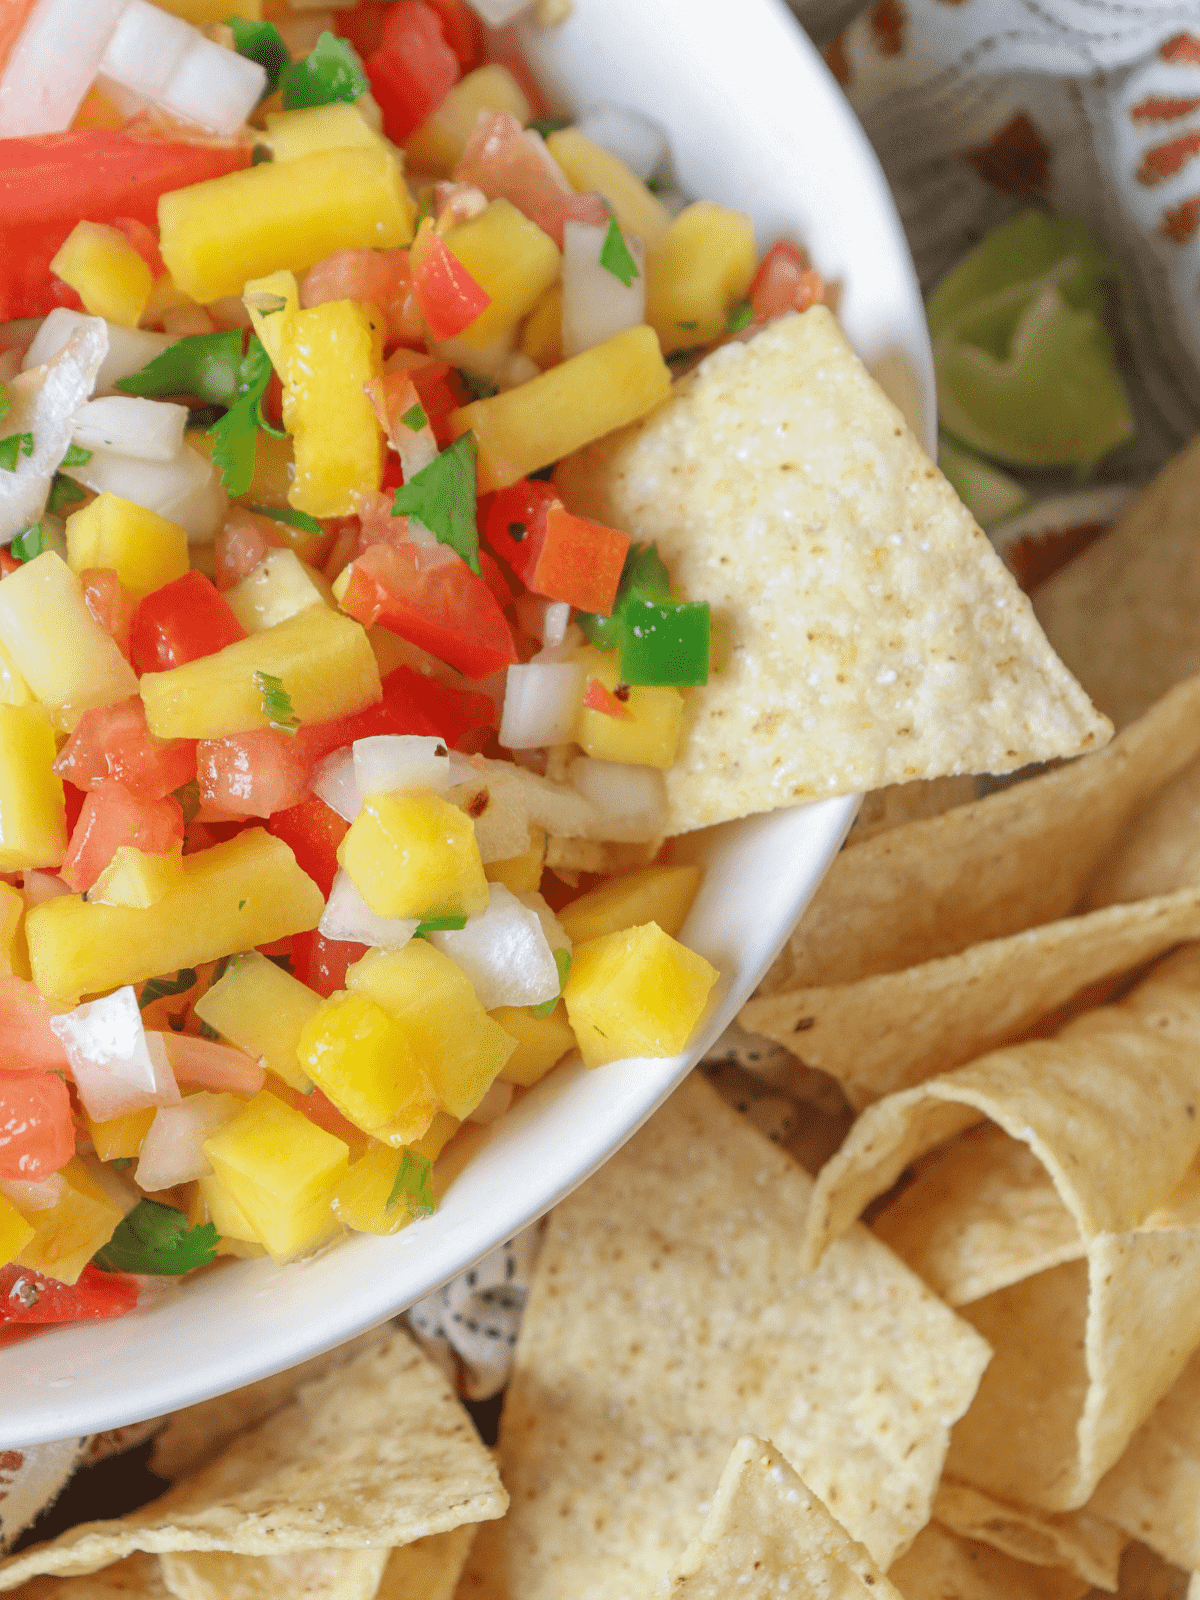 close up of finely diced vegetables and fruit with tortilla chips